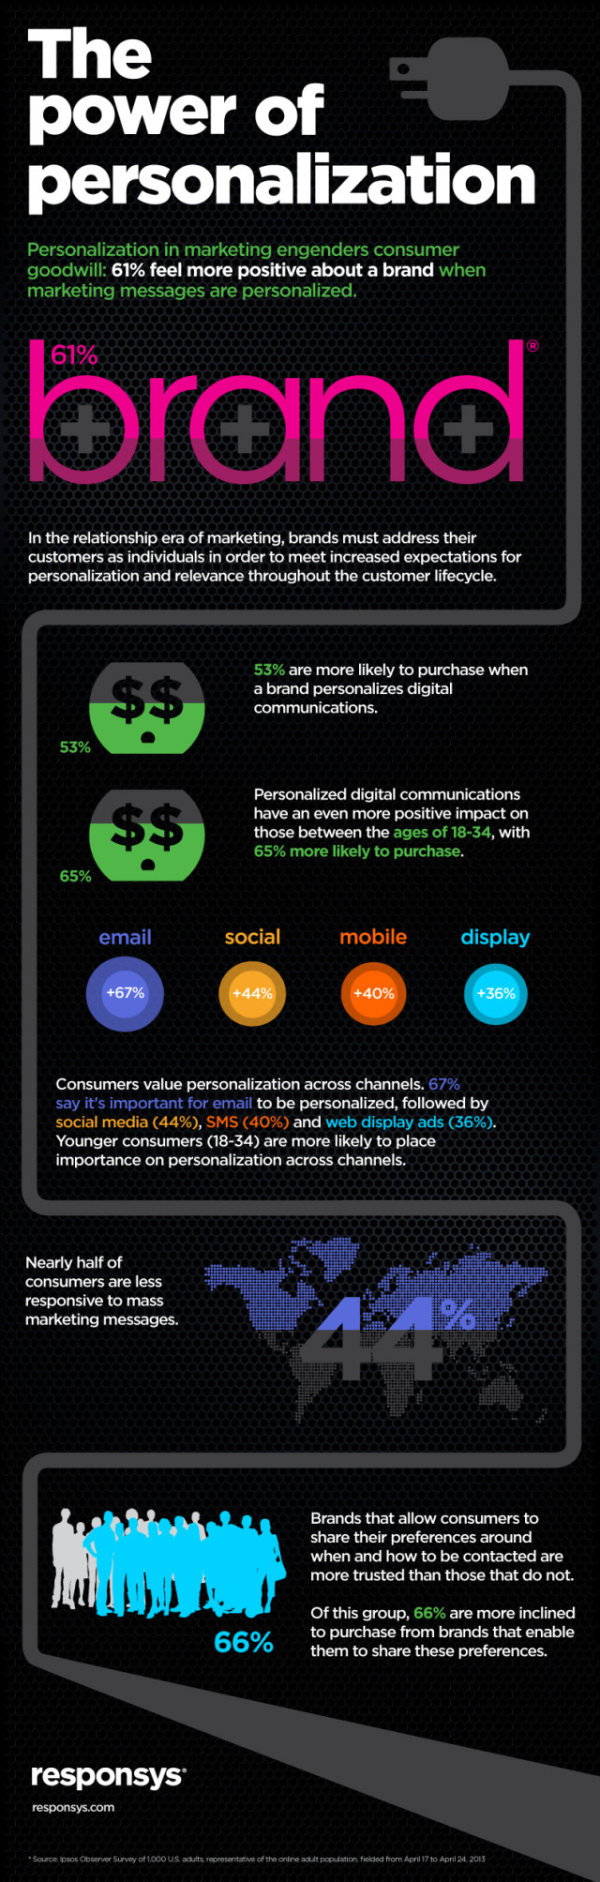 Responsys Power of Personalization Infographic July 2013 640x2007 resized 600